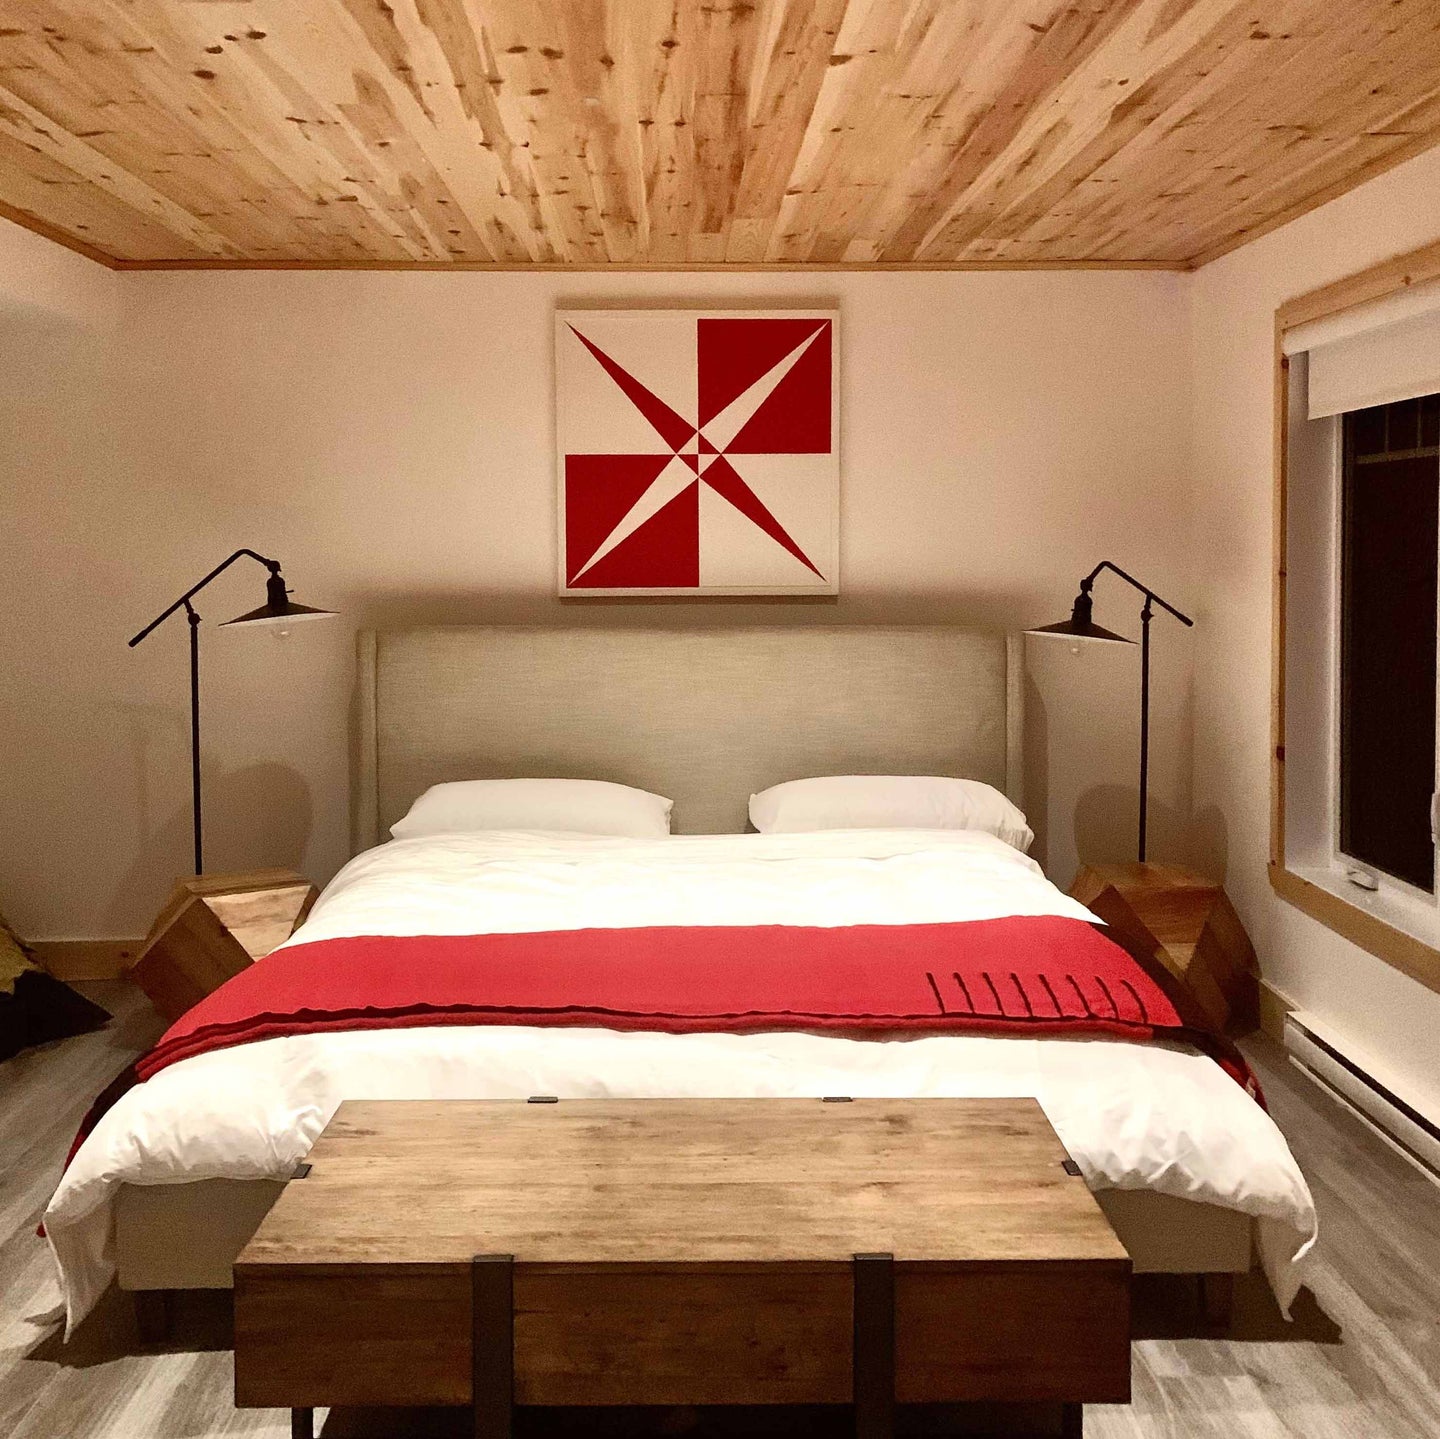 CROSSING CANOES - Traditional barn quilt